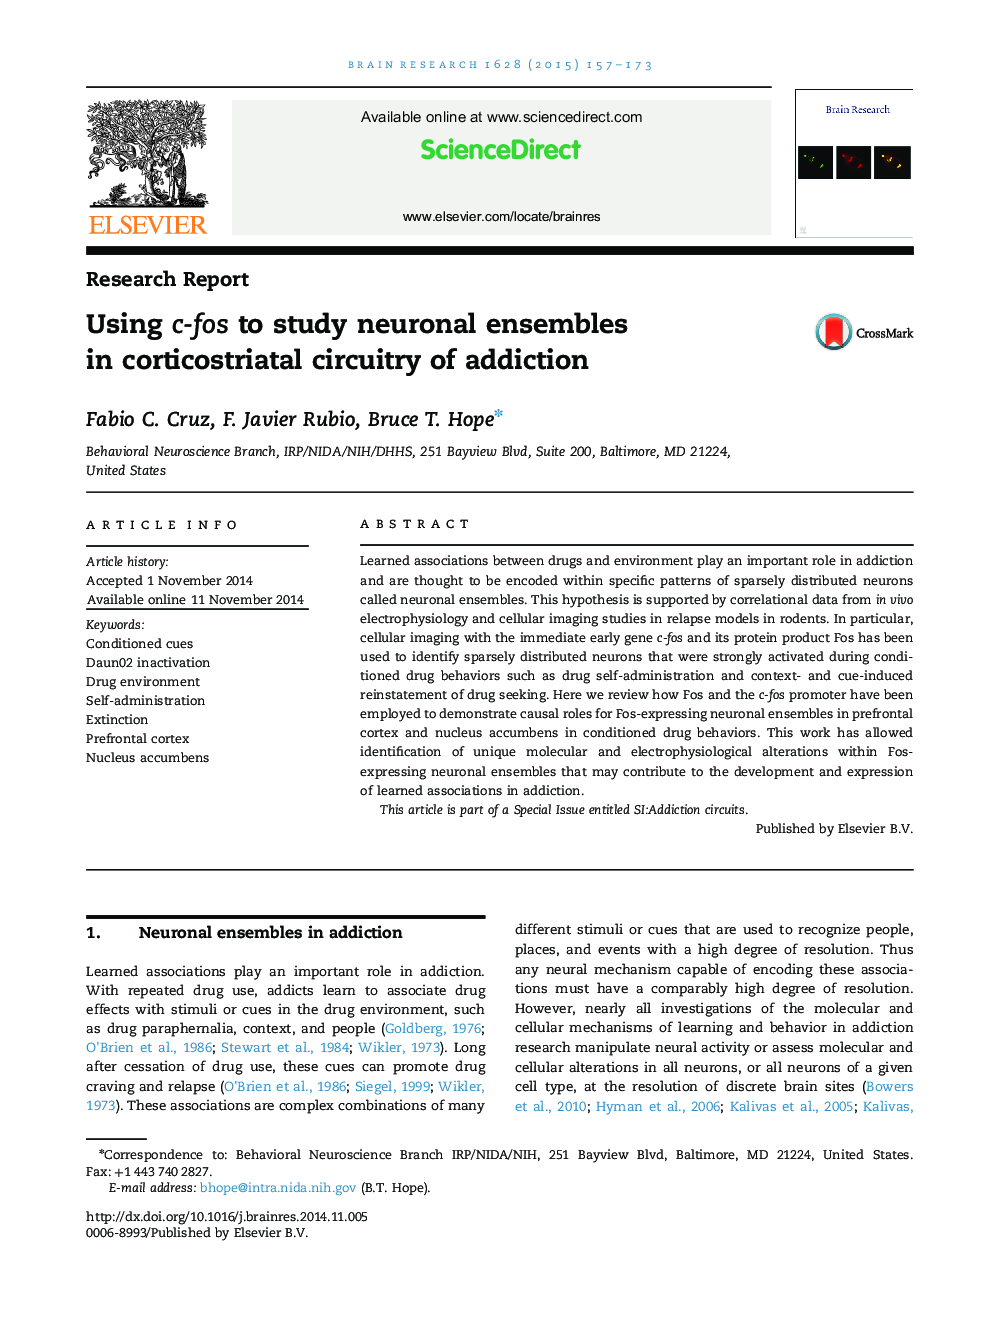 Research ReportUsing c-fos to study neuronal ensembles in corticostriatal circuitry of addiction